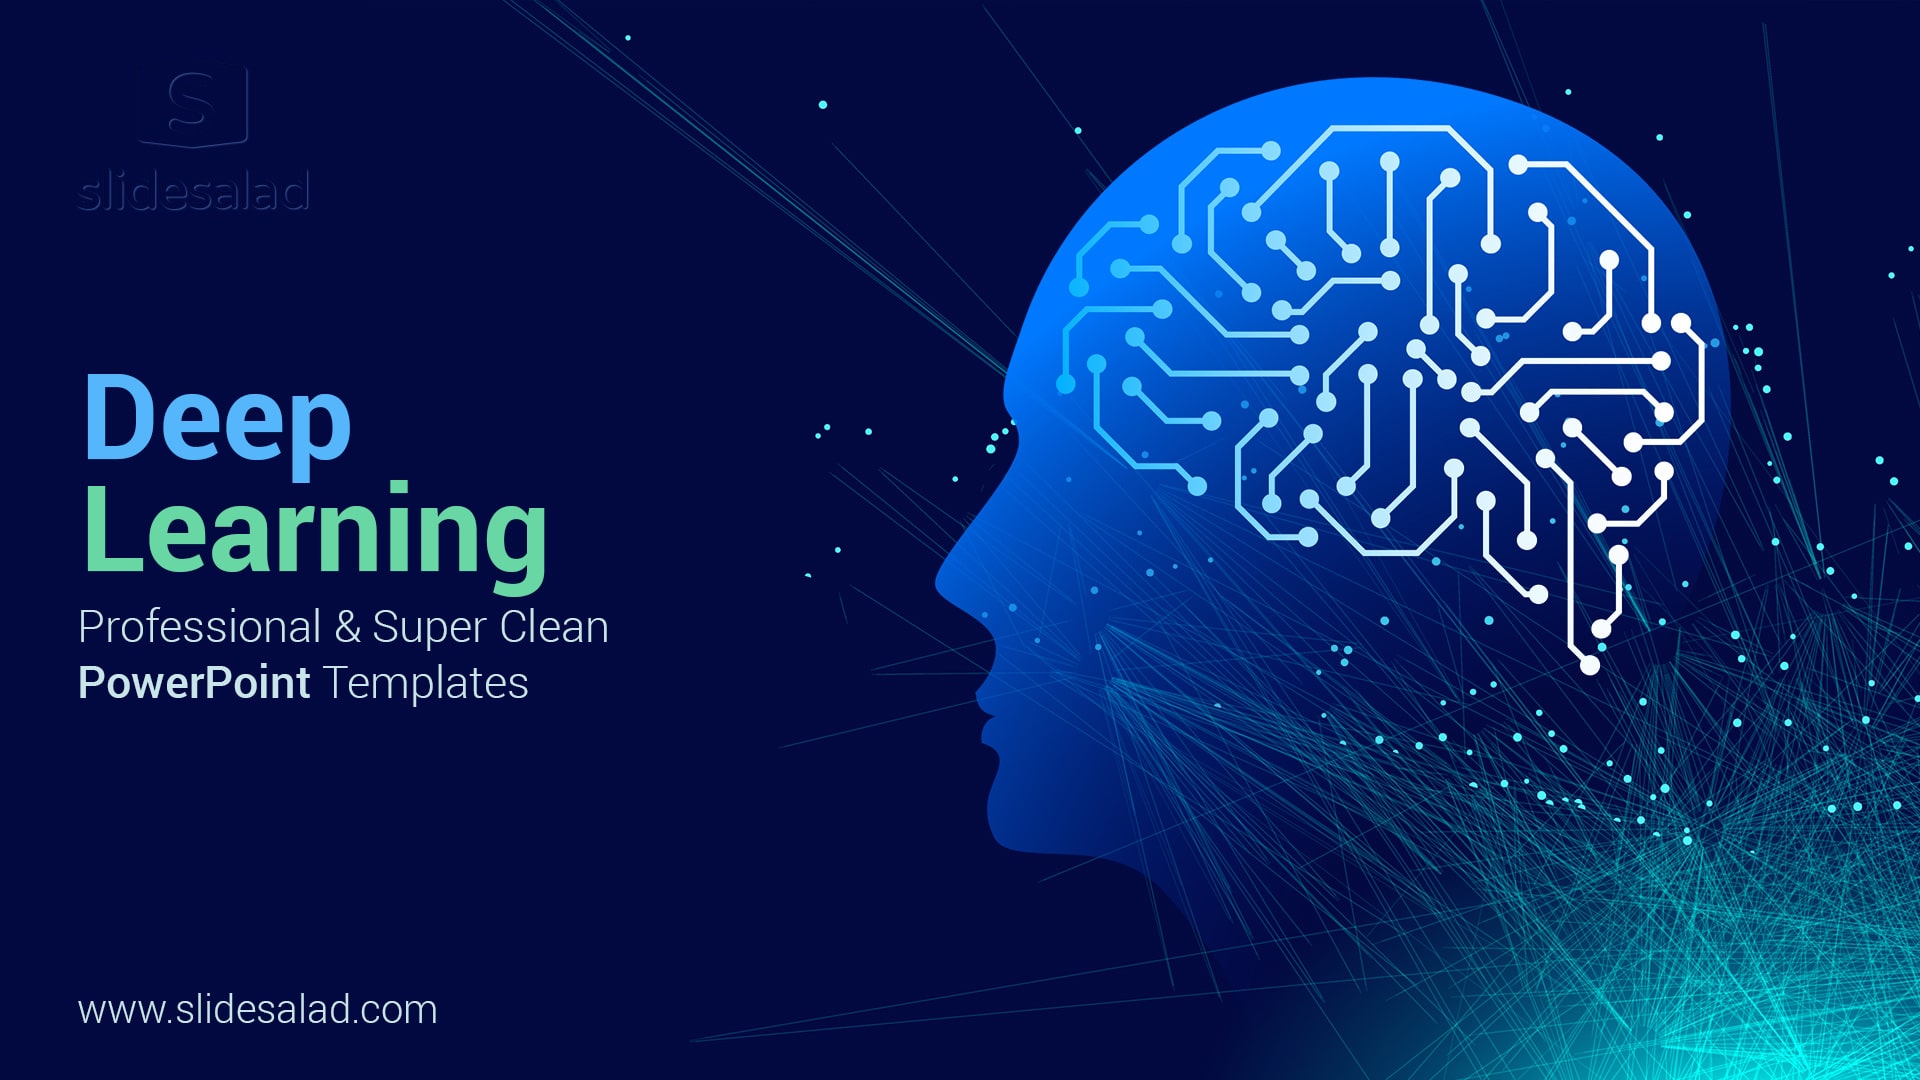 Deep Learning PowerPoint Template Designs - Create Complete Presentations on Representation-Learning Methods using Machine Learning